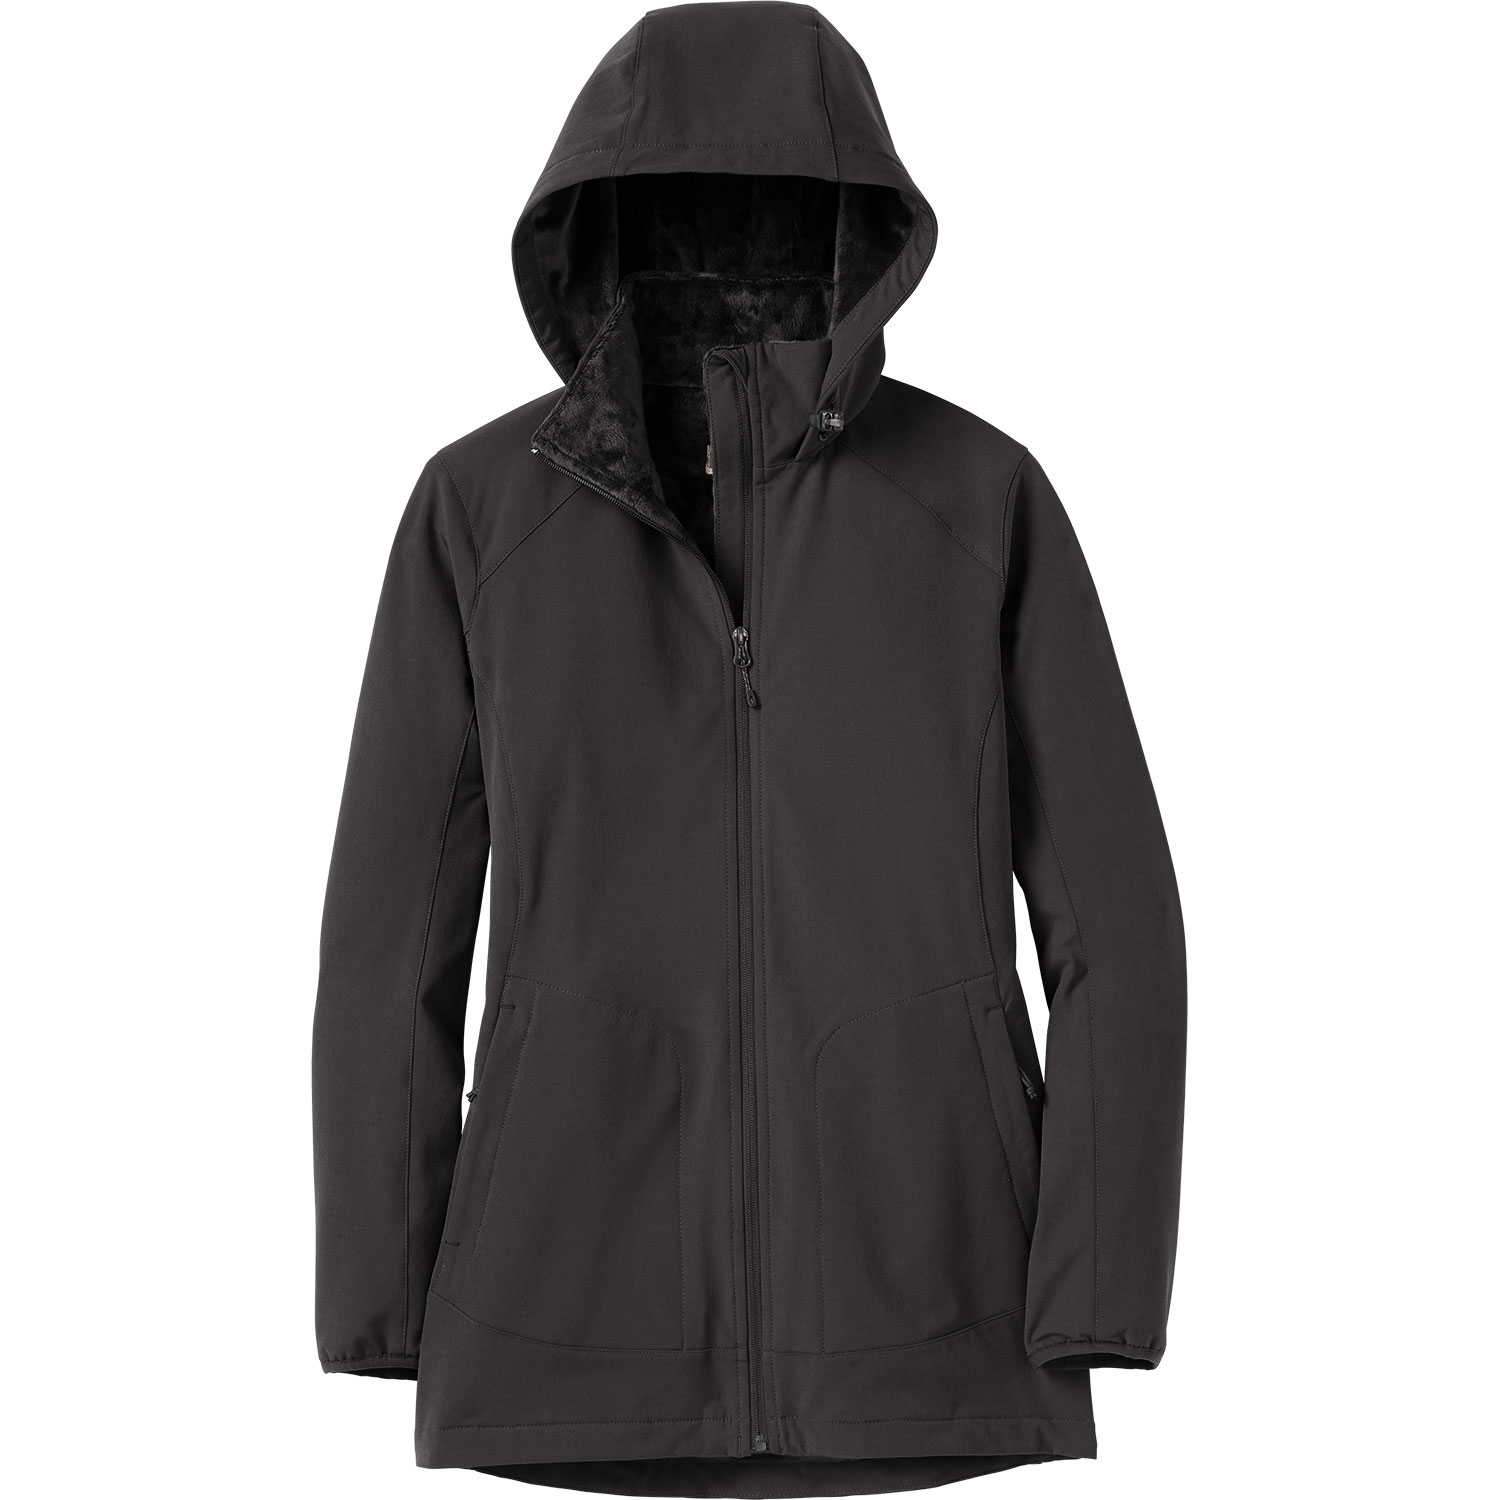 Women's Plus Frostmite Parka | Duluth Trading Company